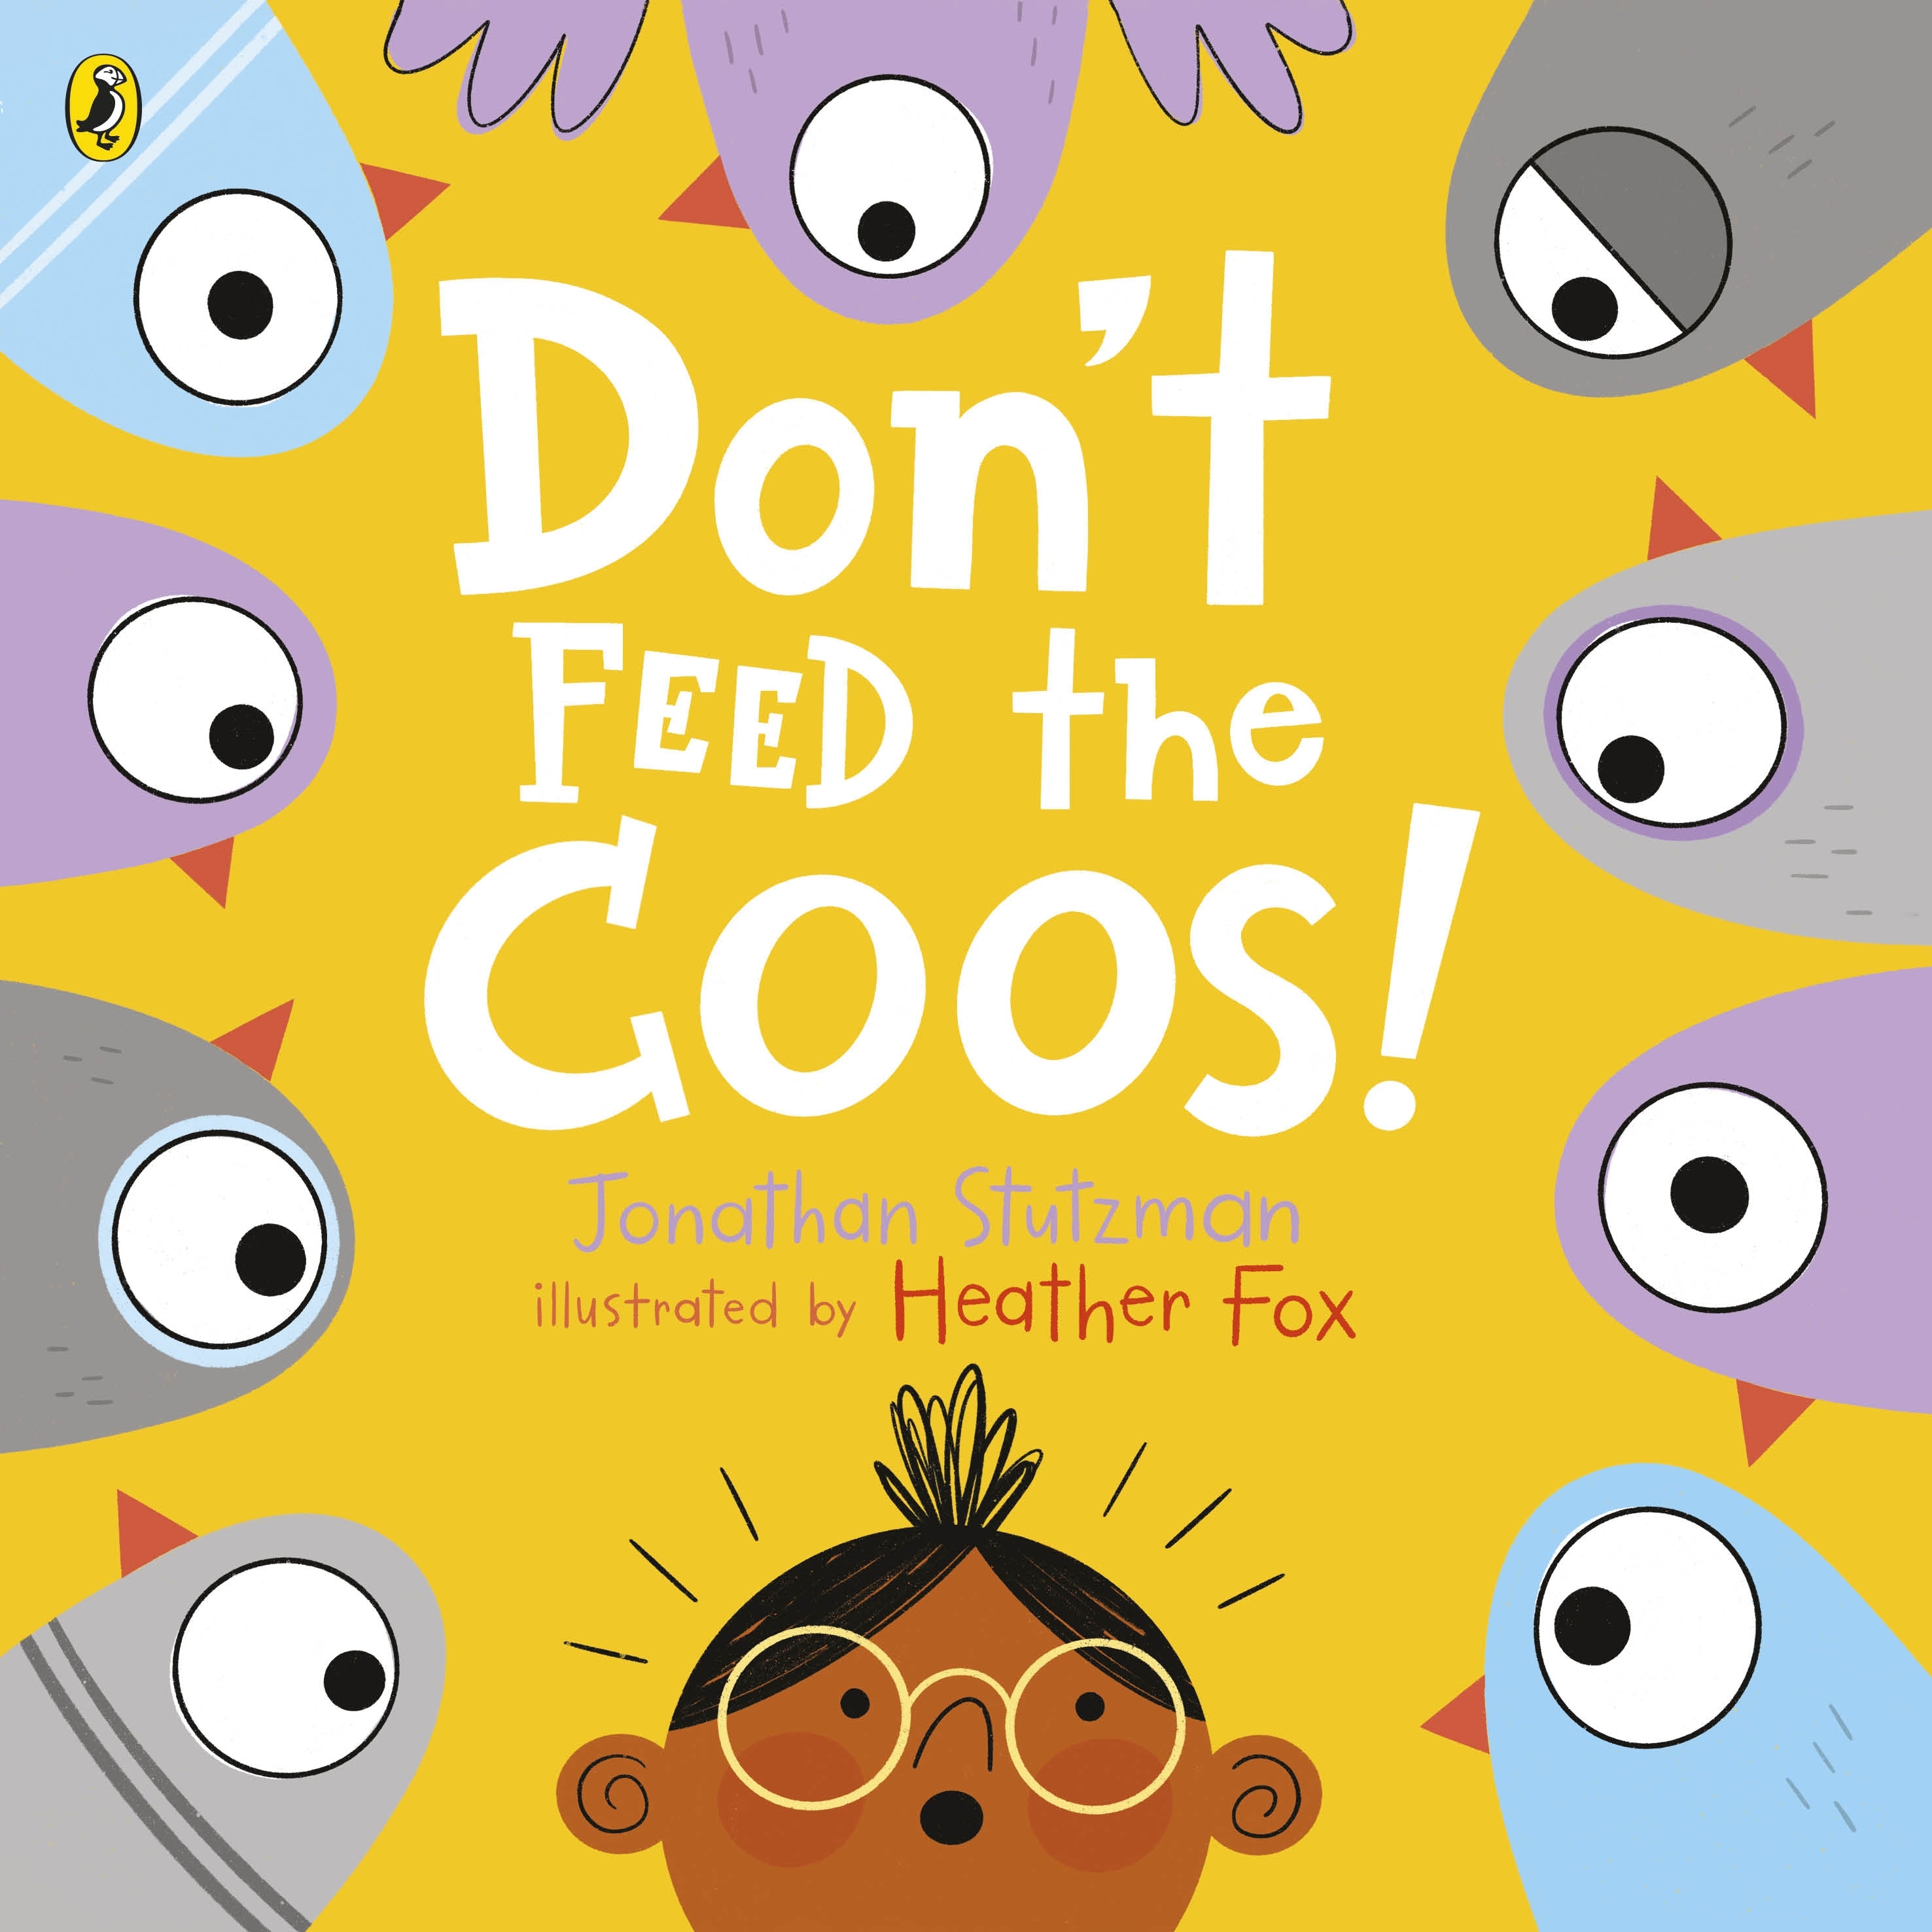 Book “Don't Feed the Coos” by Jonathan Stutzman, Heather Fox — June 3, 2021